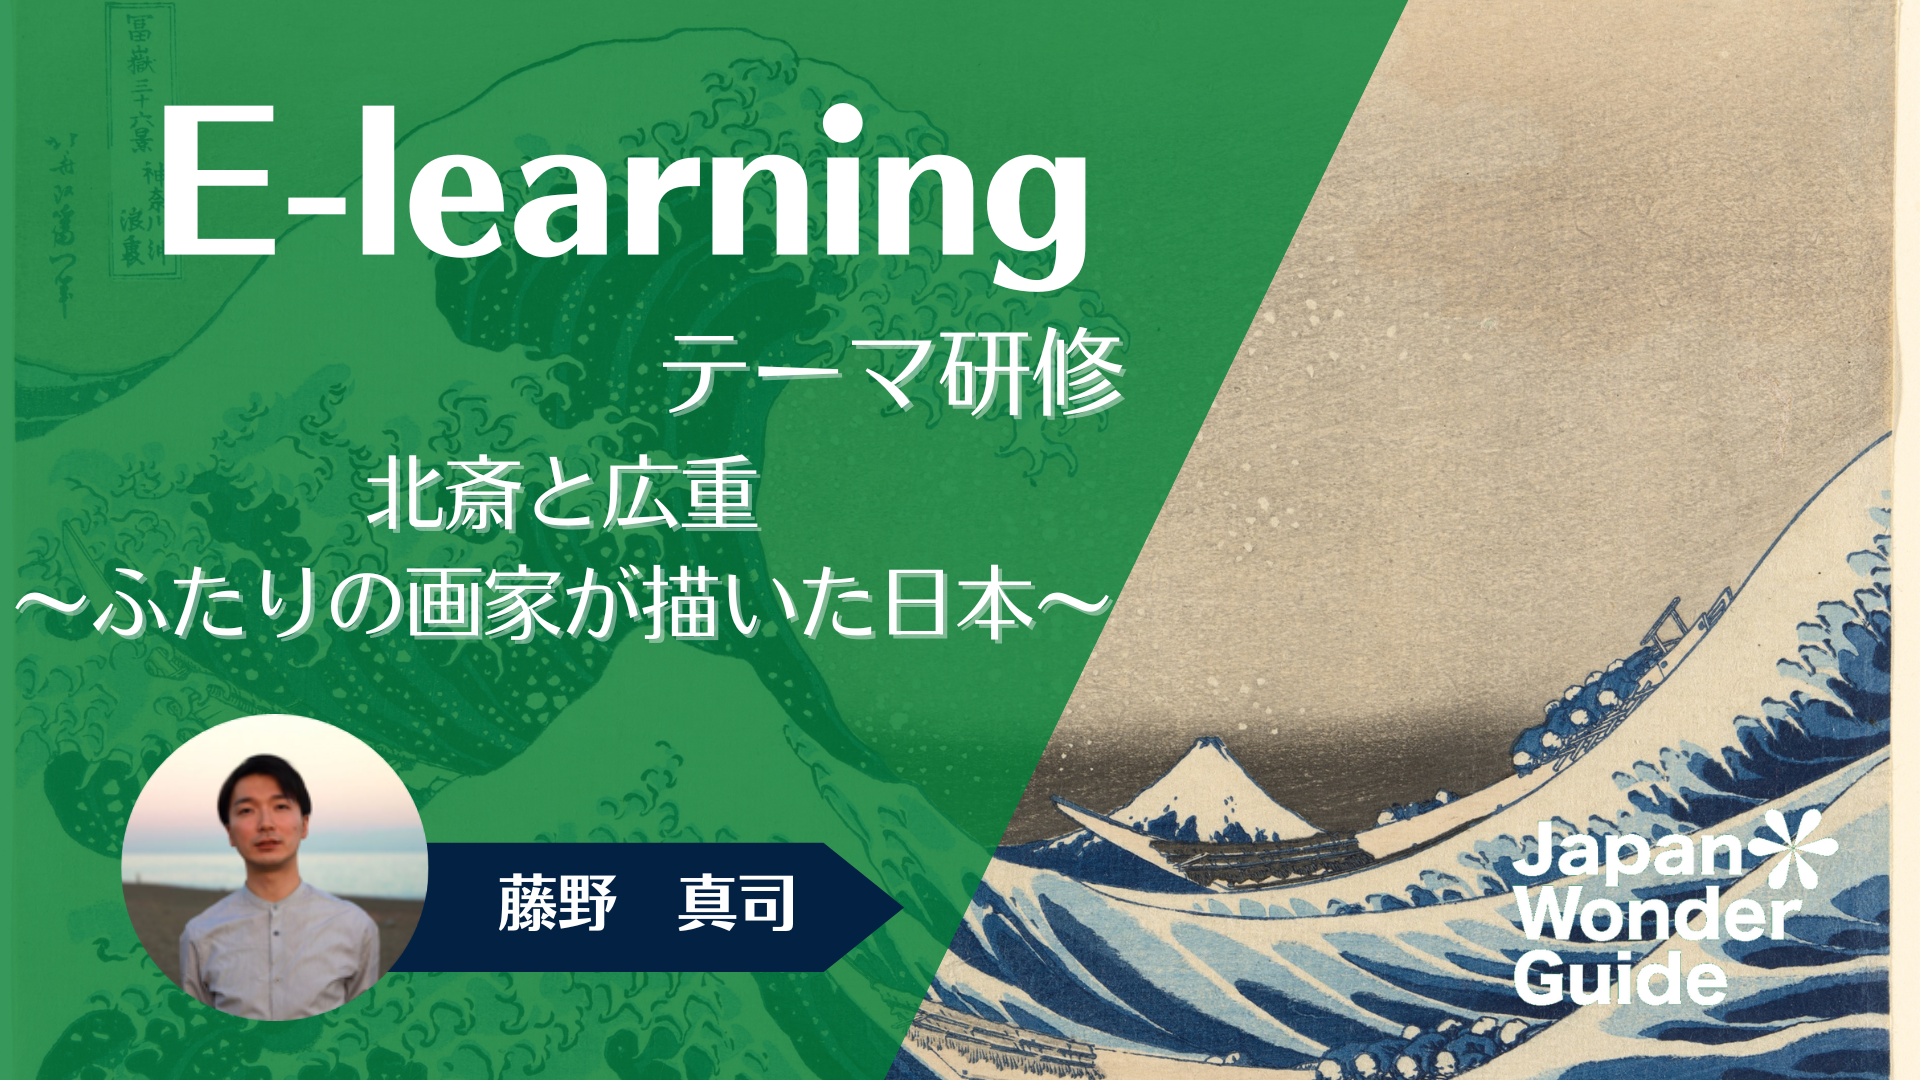 E-learning テーマ研修「北斎と広重〜ふたりの画家が描いた日本〜」